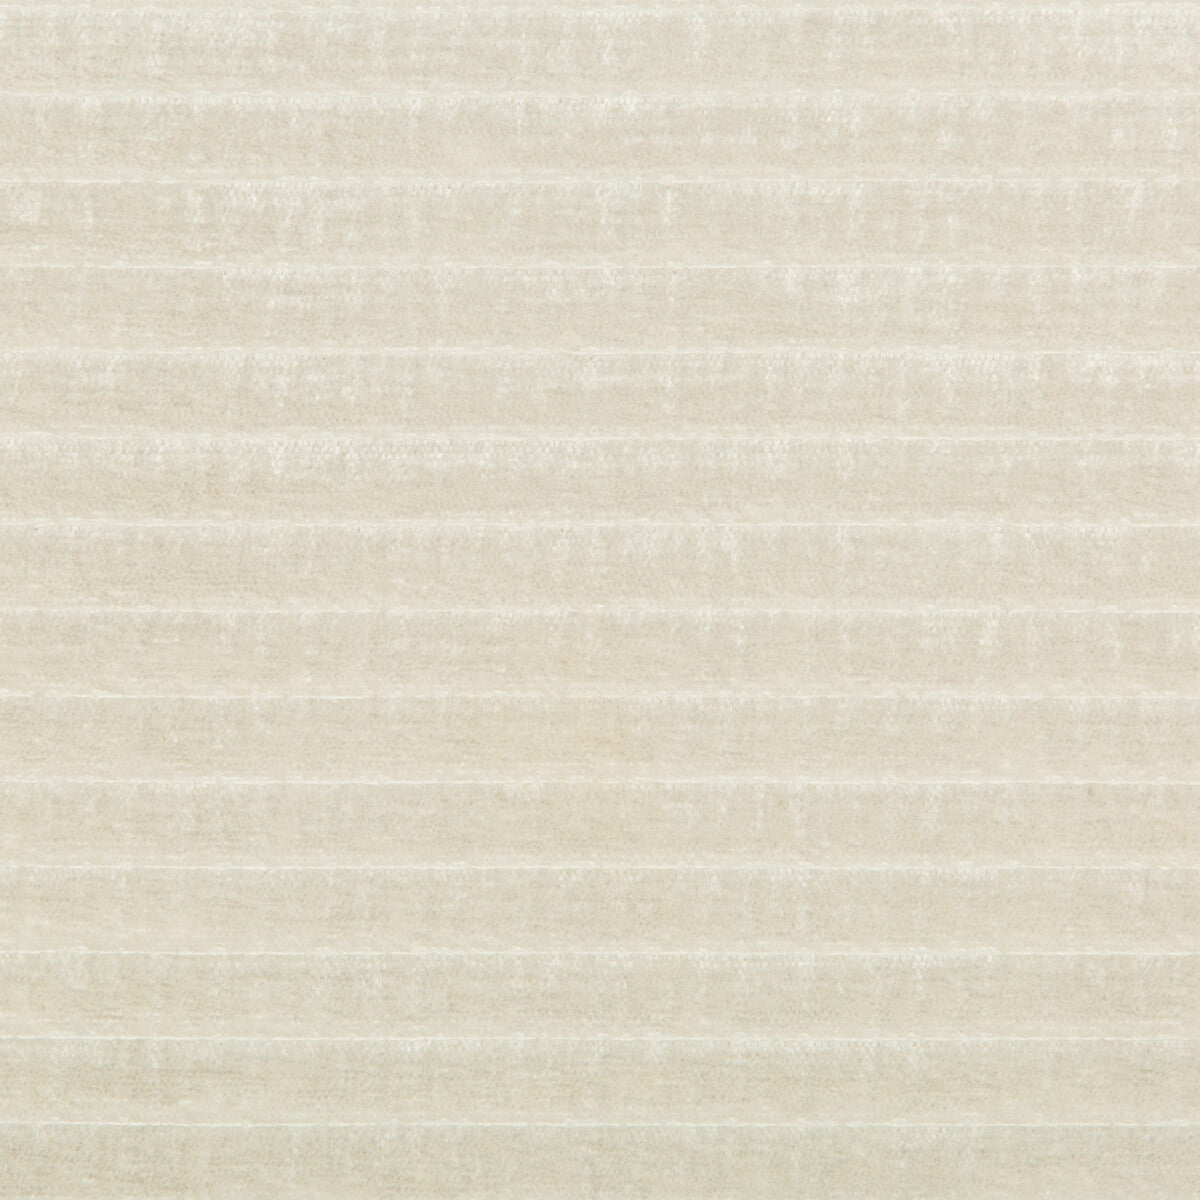 Kravet Smart fabric in 35780-1 color - pattern 35780.1.0 - by Kravet Smart in the Performance collection